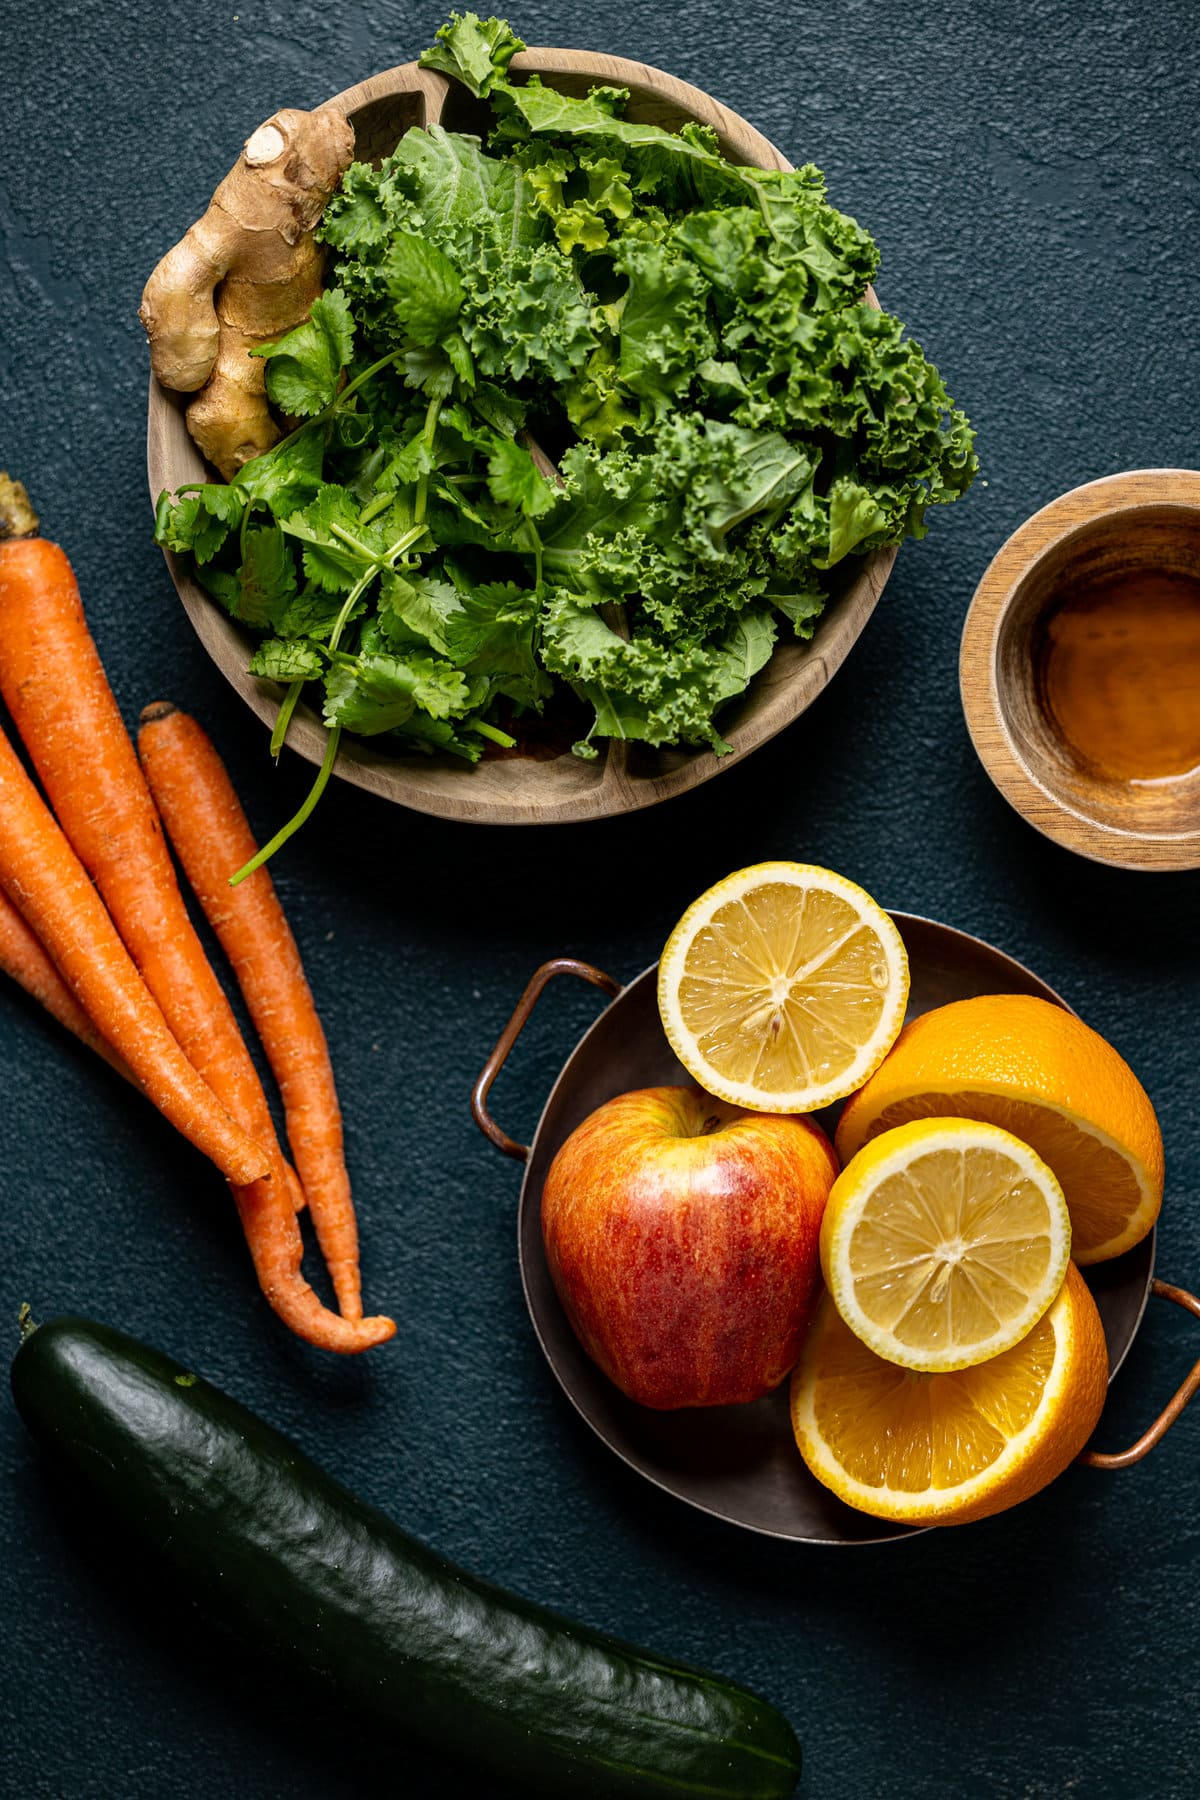 Ingredients for Cleansing Sugar Detox Juice including carrots, apples, oranges, and a cucumber